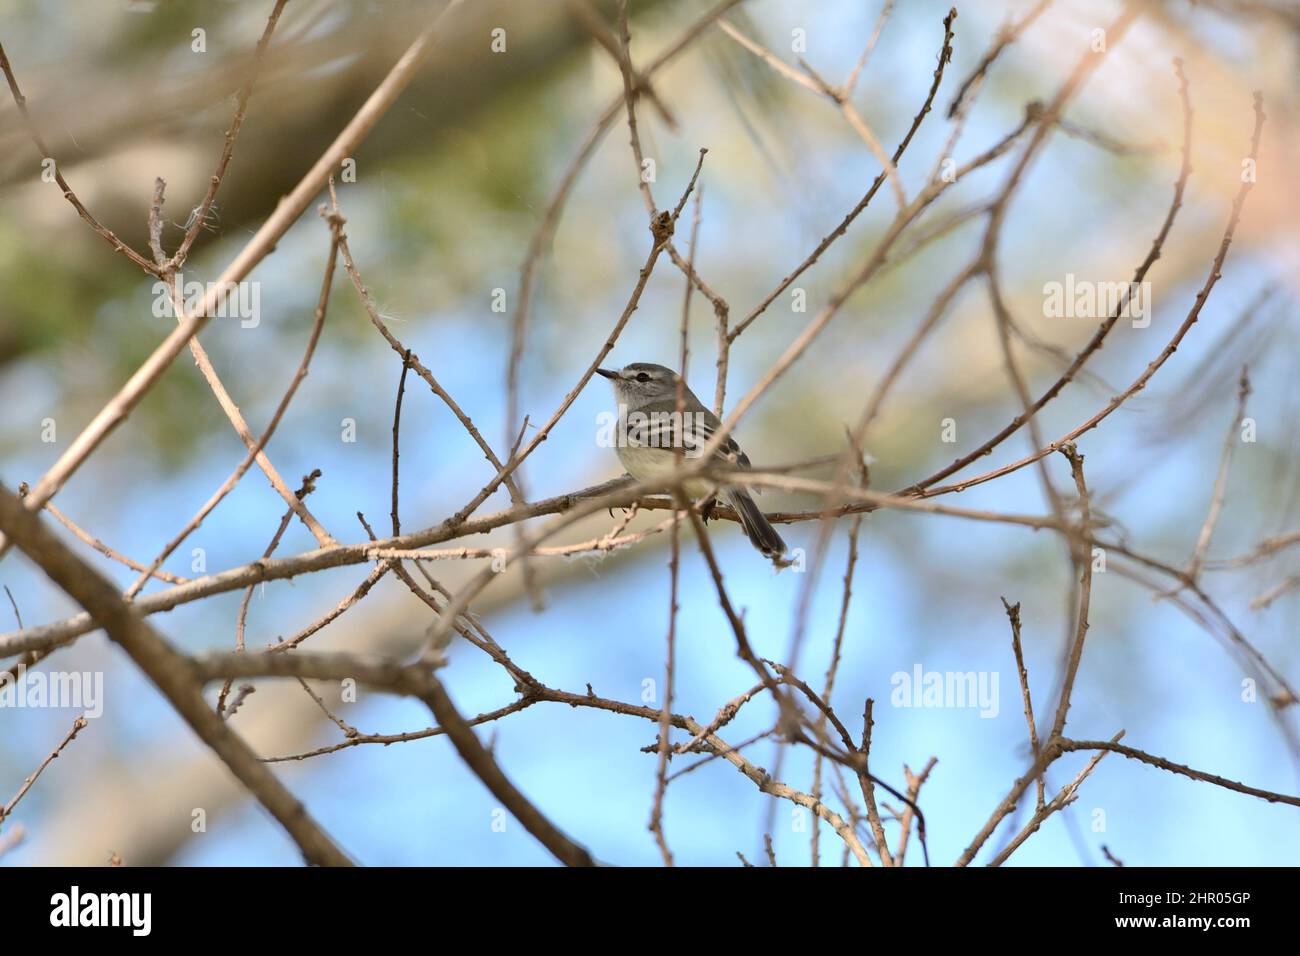 White-crested Tyrannulet (Serpophaga subcristata) on a branch, Costanera Sur Ecological Reserve, Buenos Aires, Argentina Stock Photo